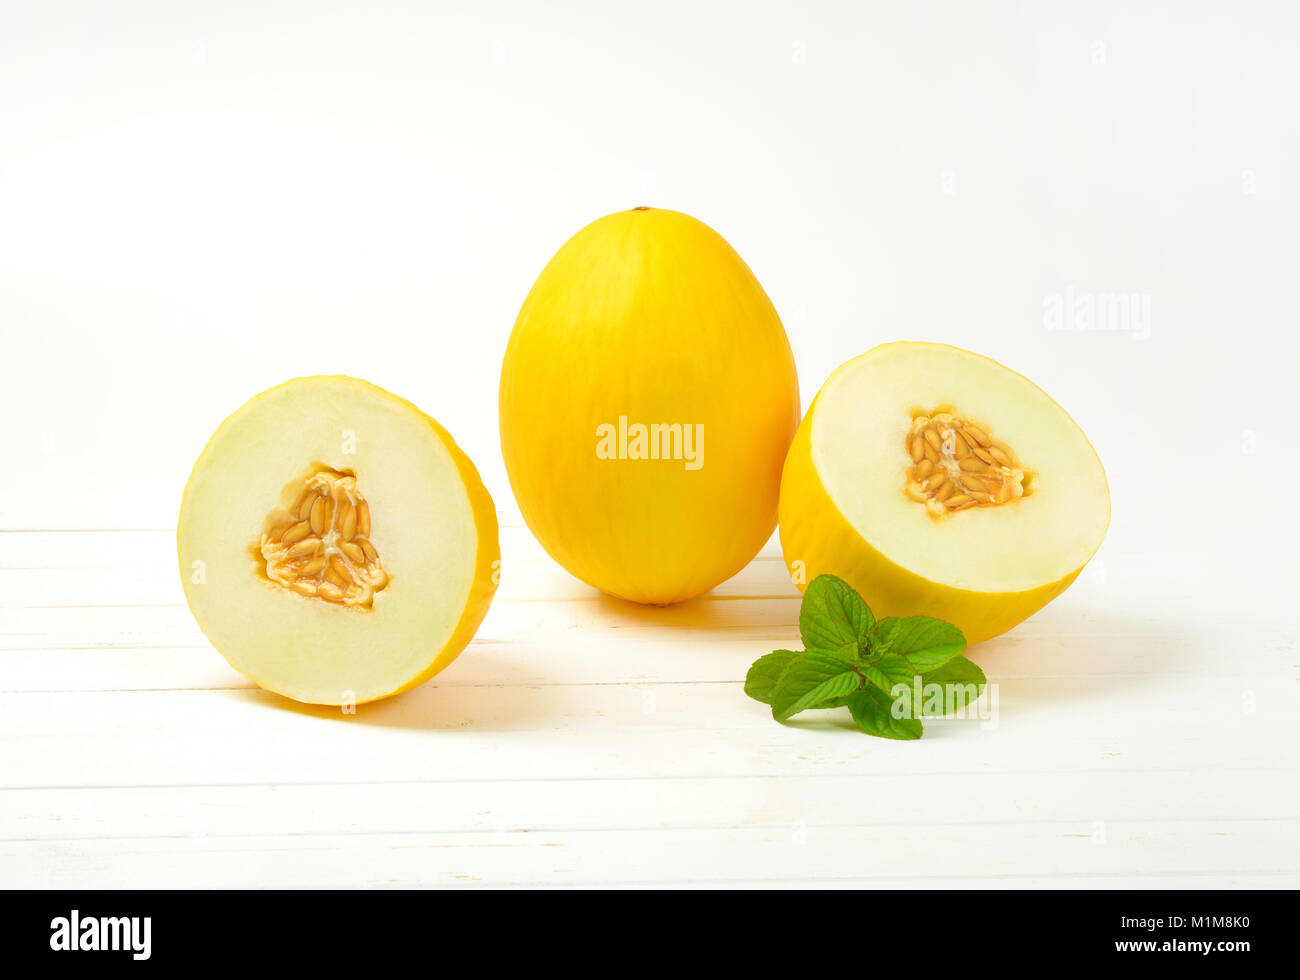 whole and halved yellow melons Stock Photo